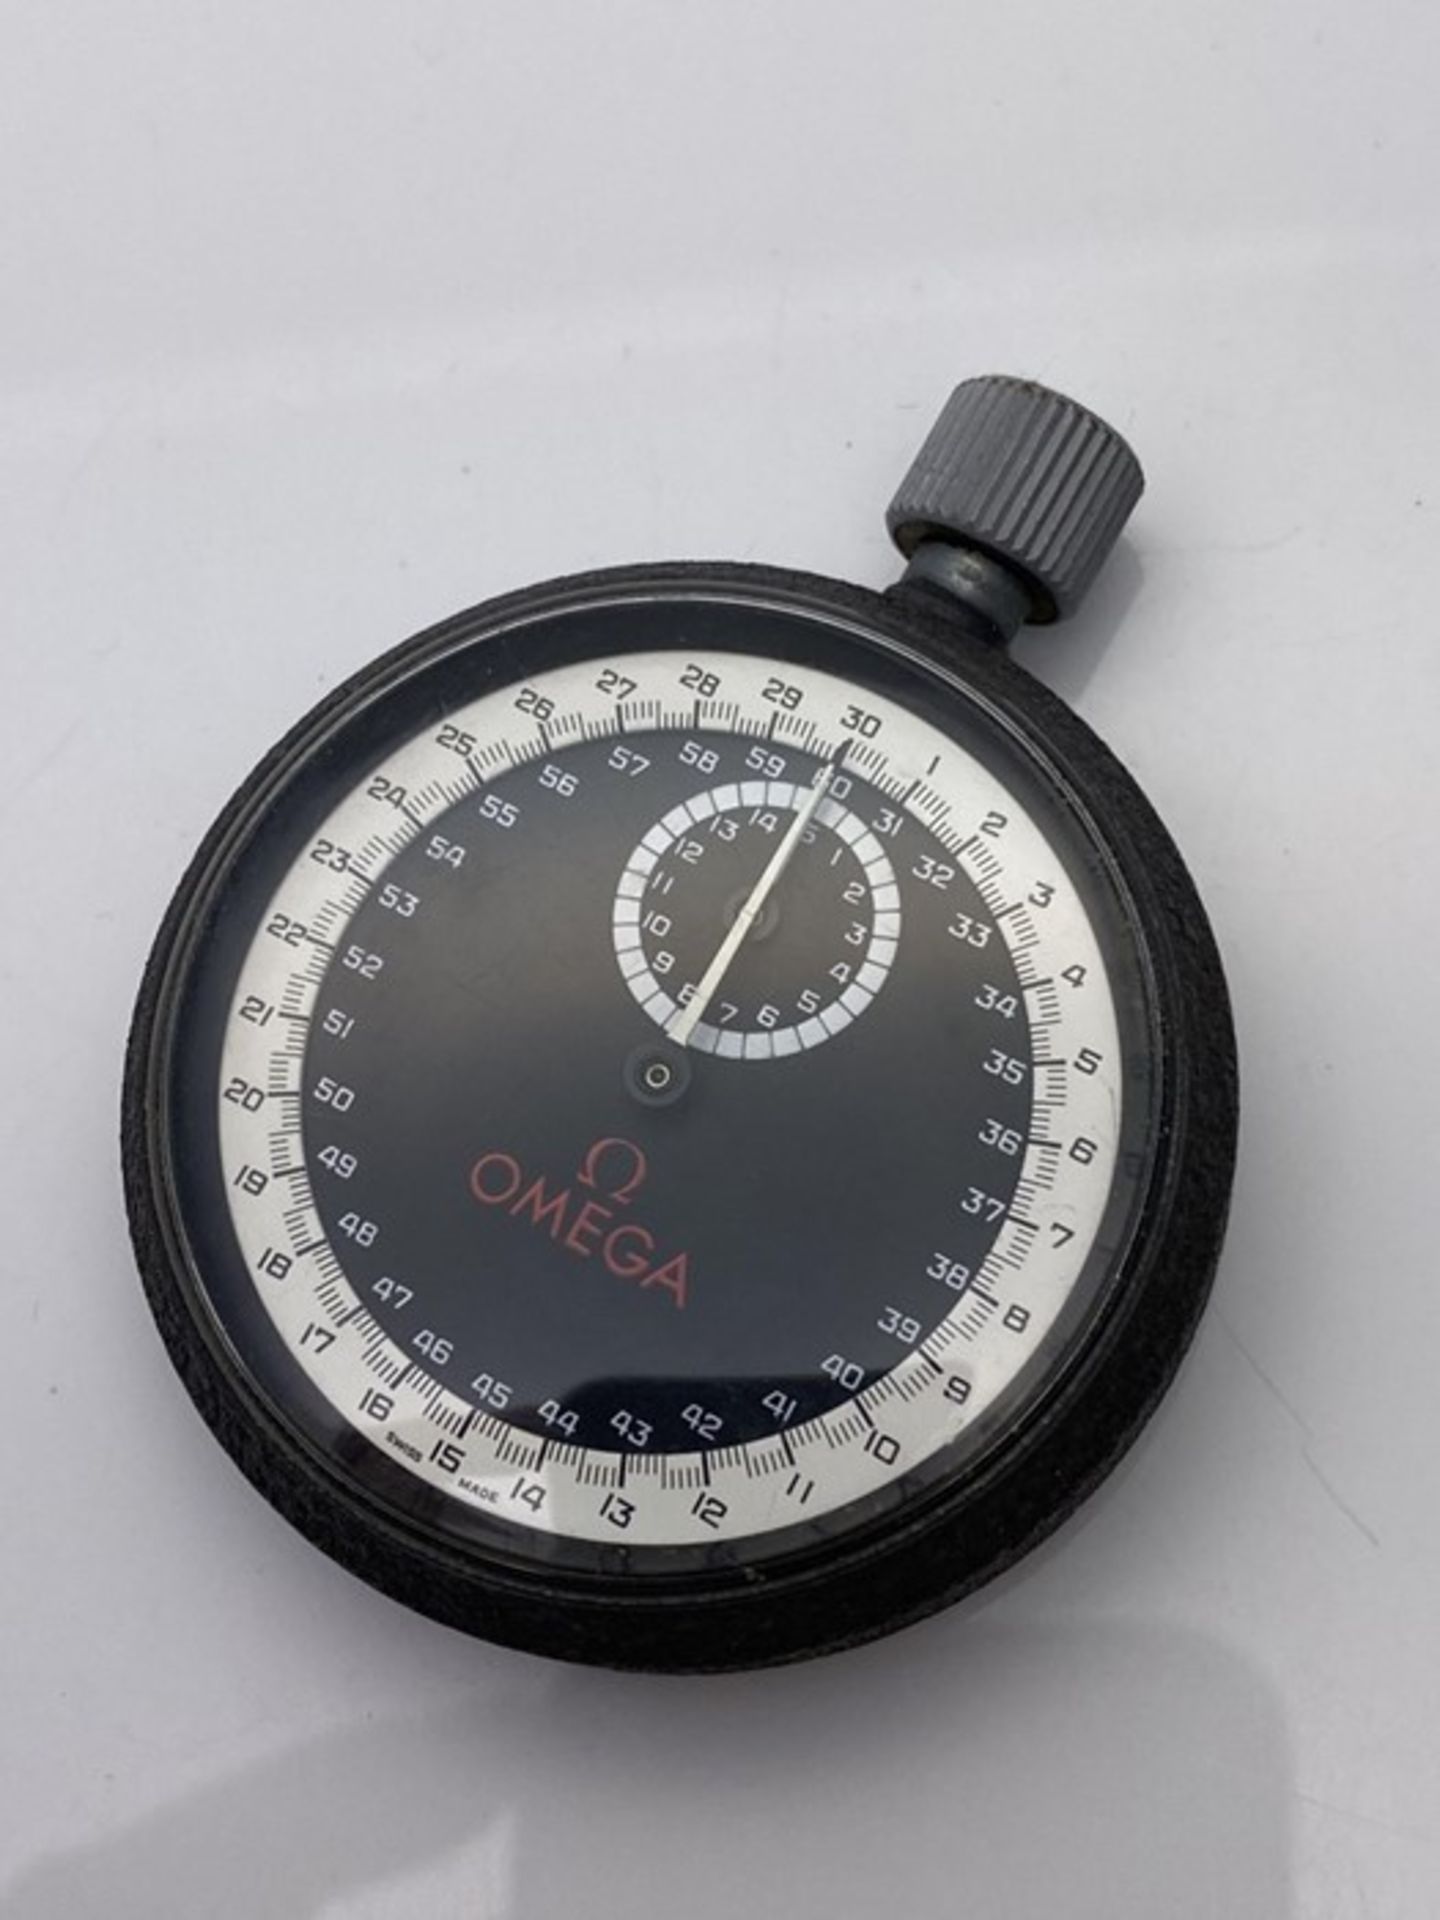 OMEGA RARE LIMITED PRODUCTION STOPWATCH, INCLUDES ORIGINAL BOOKLET (350) - Image 4 of 4